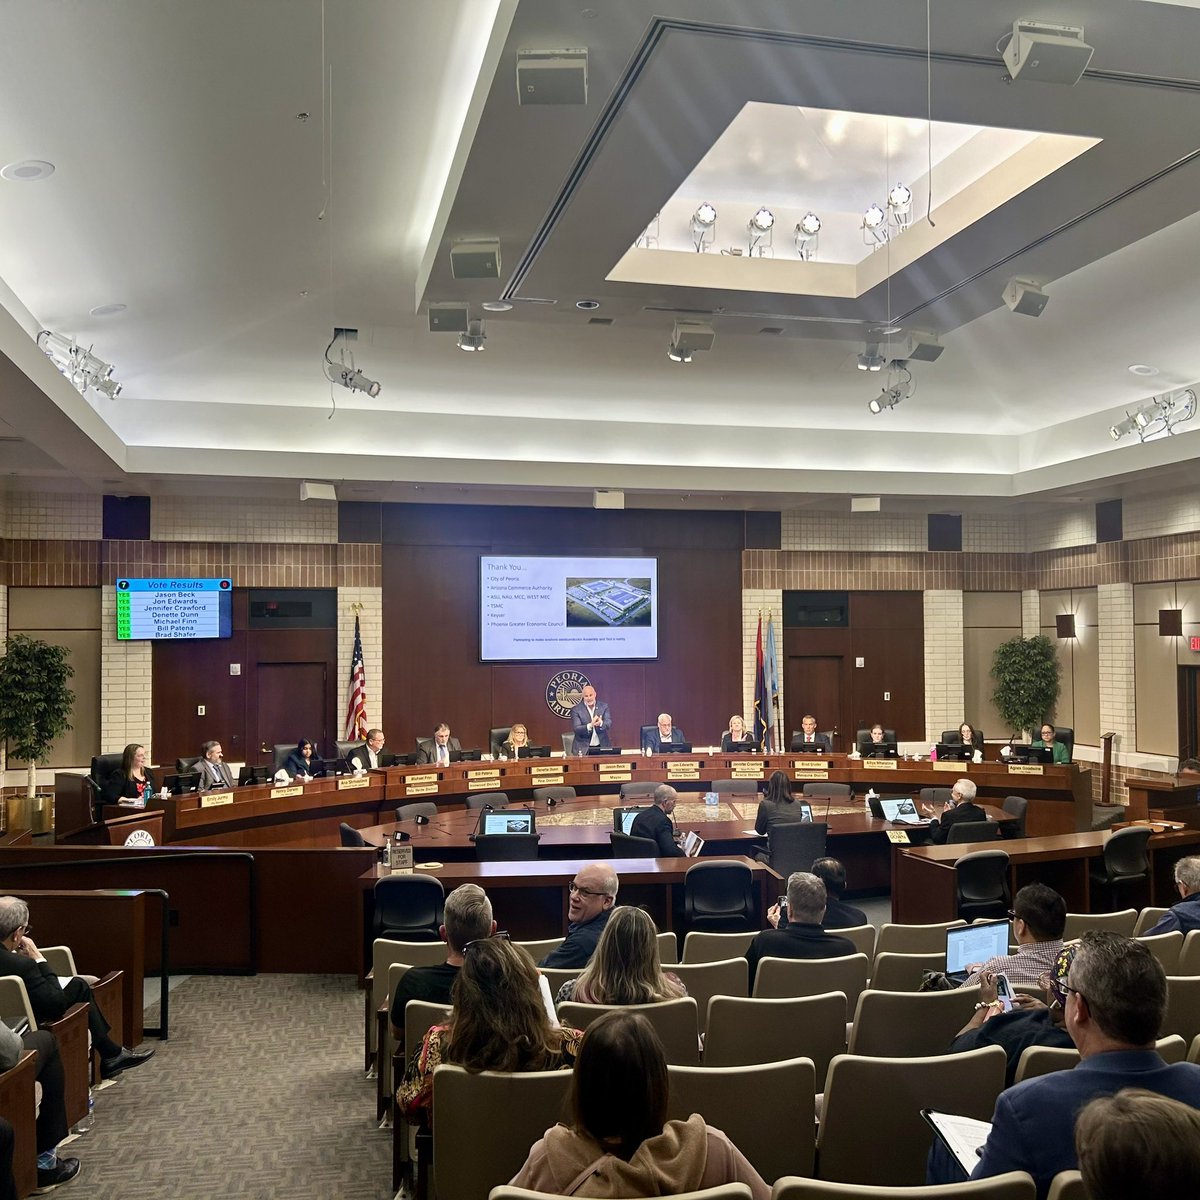 Tonight, Peoria Council voted to approve a development agreement with @AmkorTechnology. Amkor is a great partner and I’m proud of Peoria’s work to bring these high quality jobs back to America, the state of Arizona, and the hard working people of Peoria.